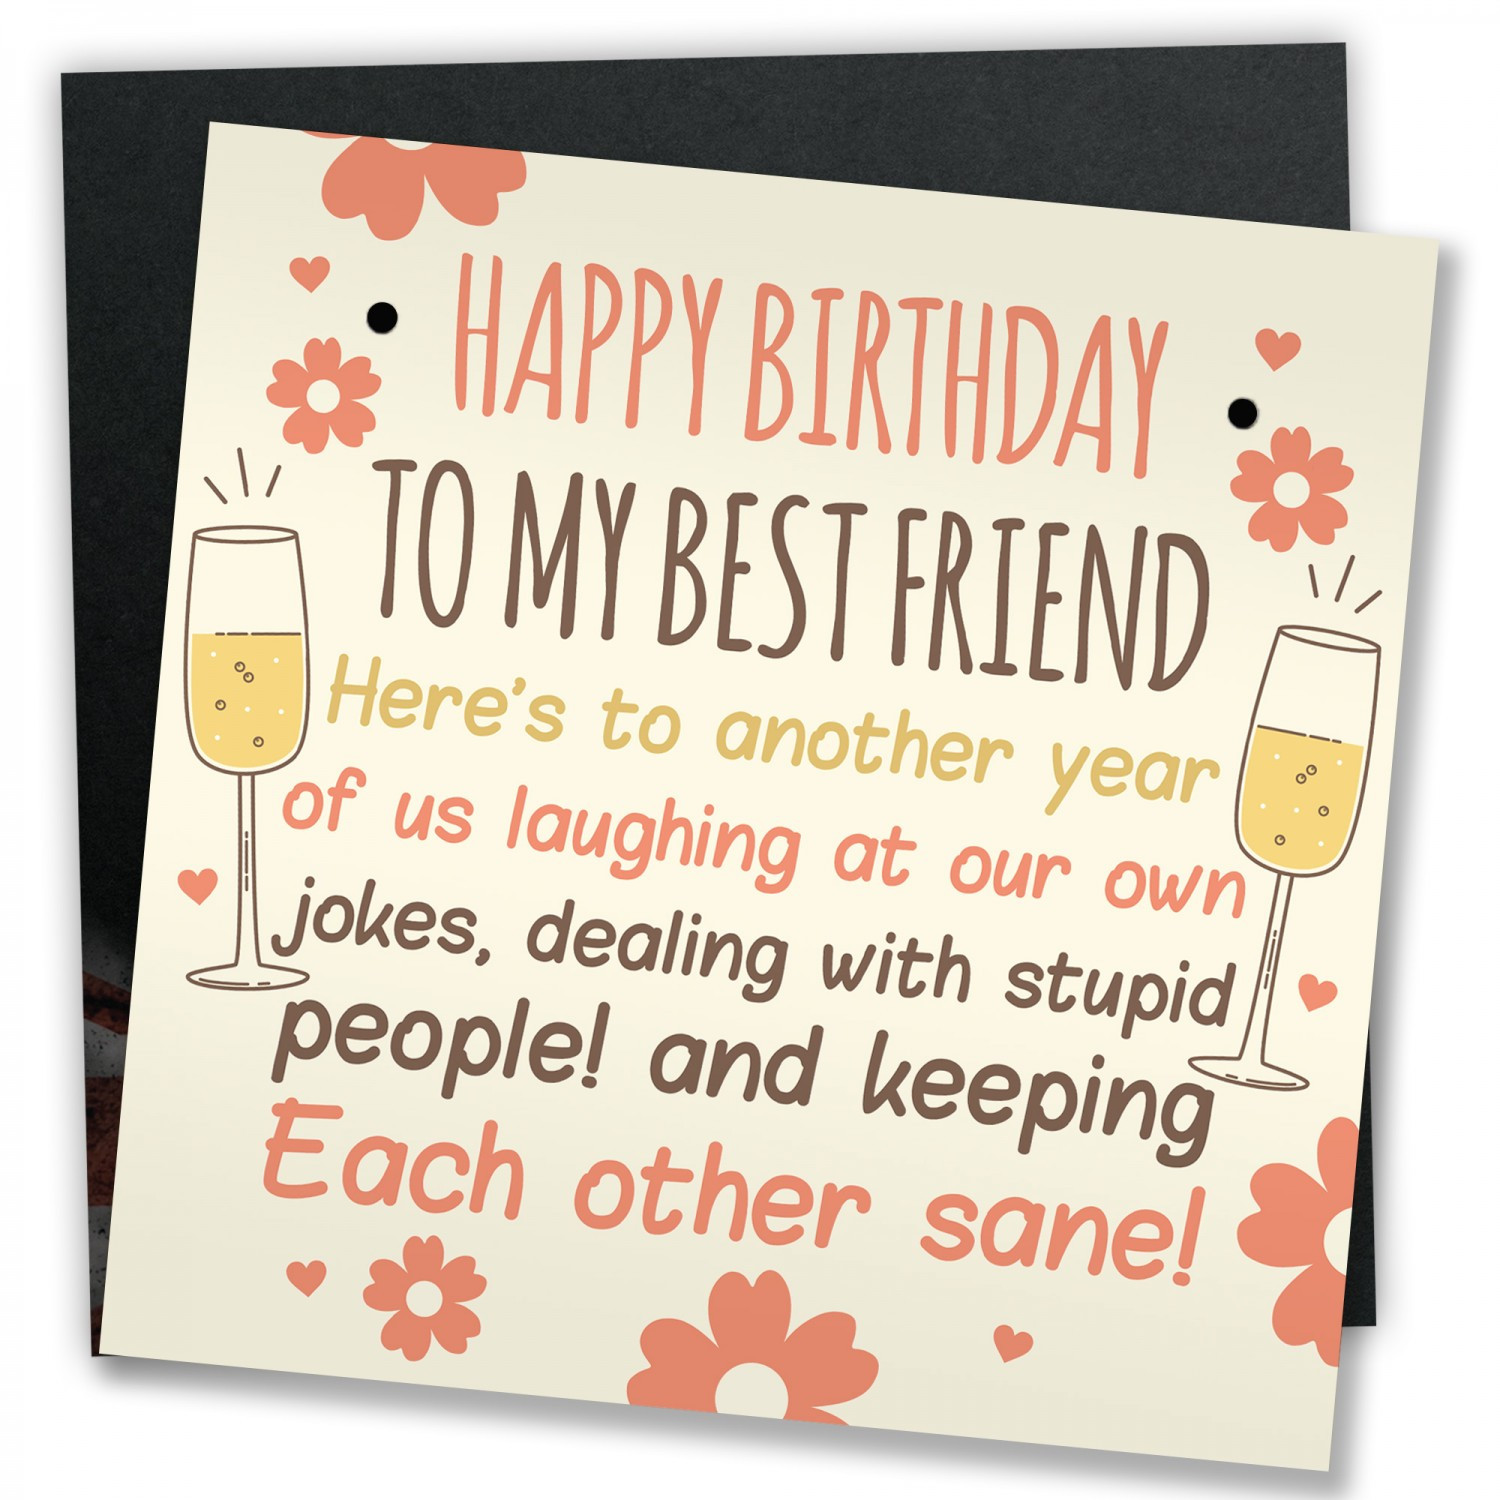 Funny Birthday Card For Friend
 Funny Best Friend Birthday Card Friendship Gifts Sign